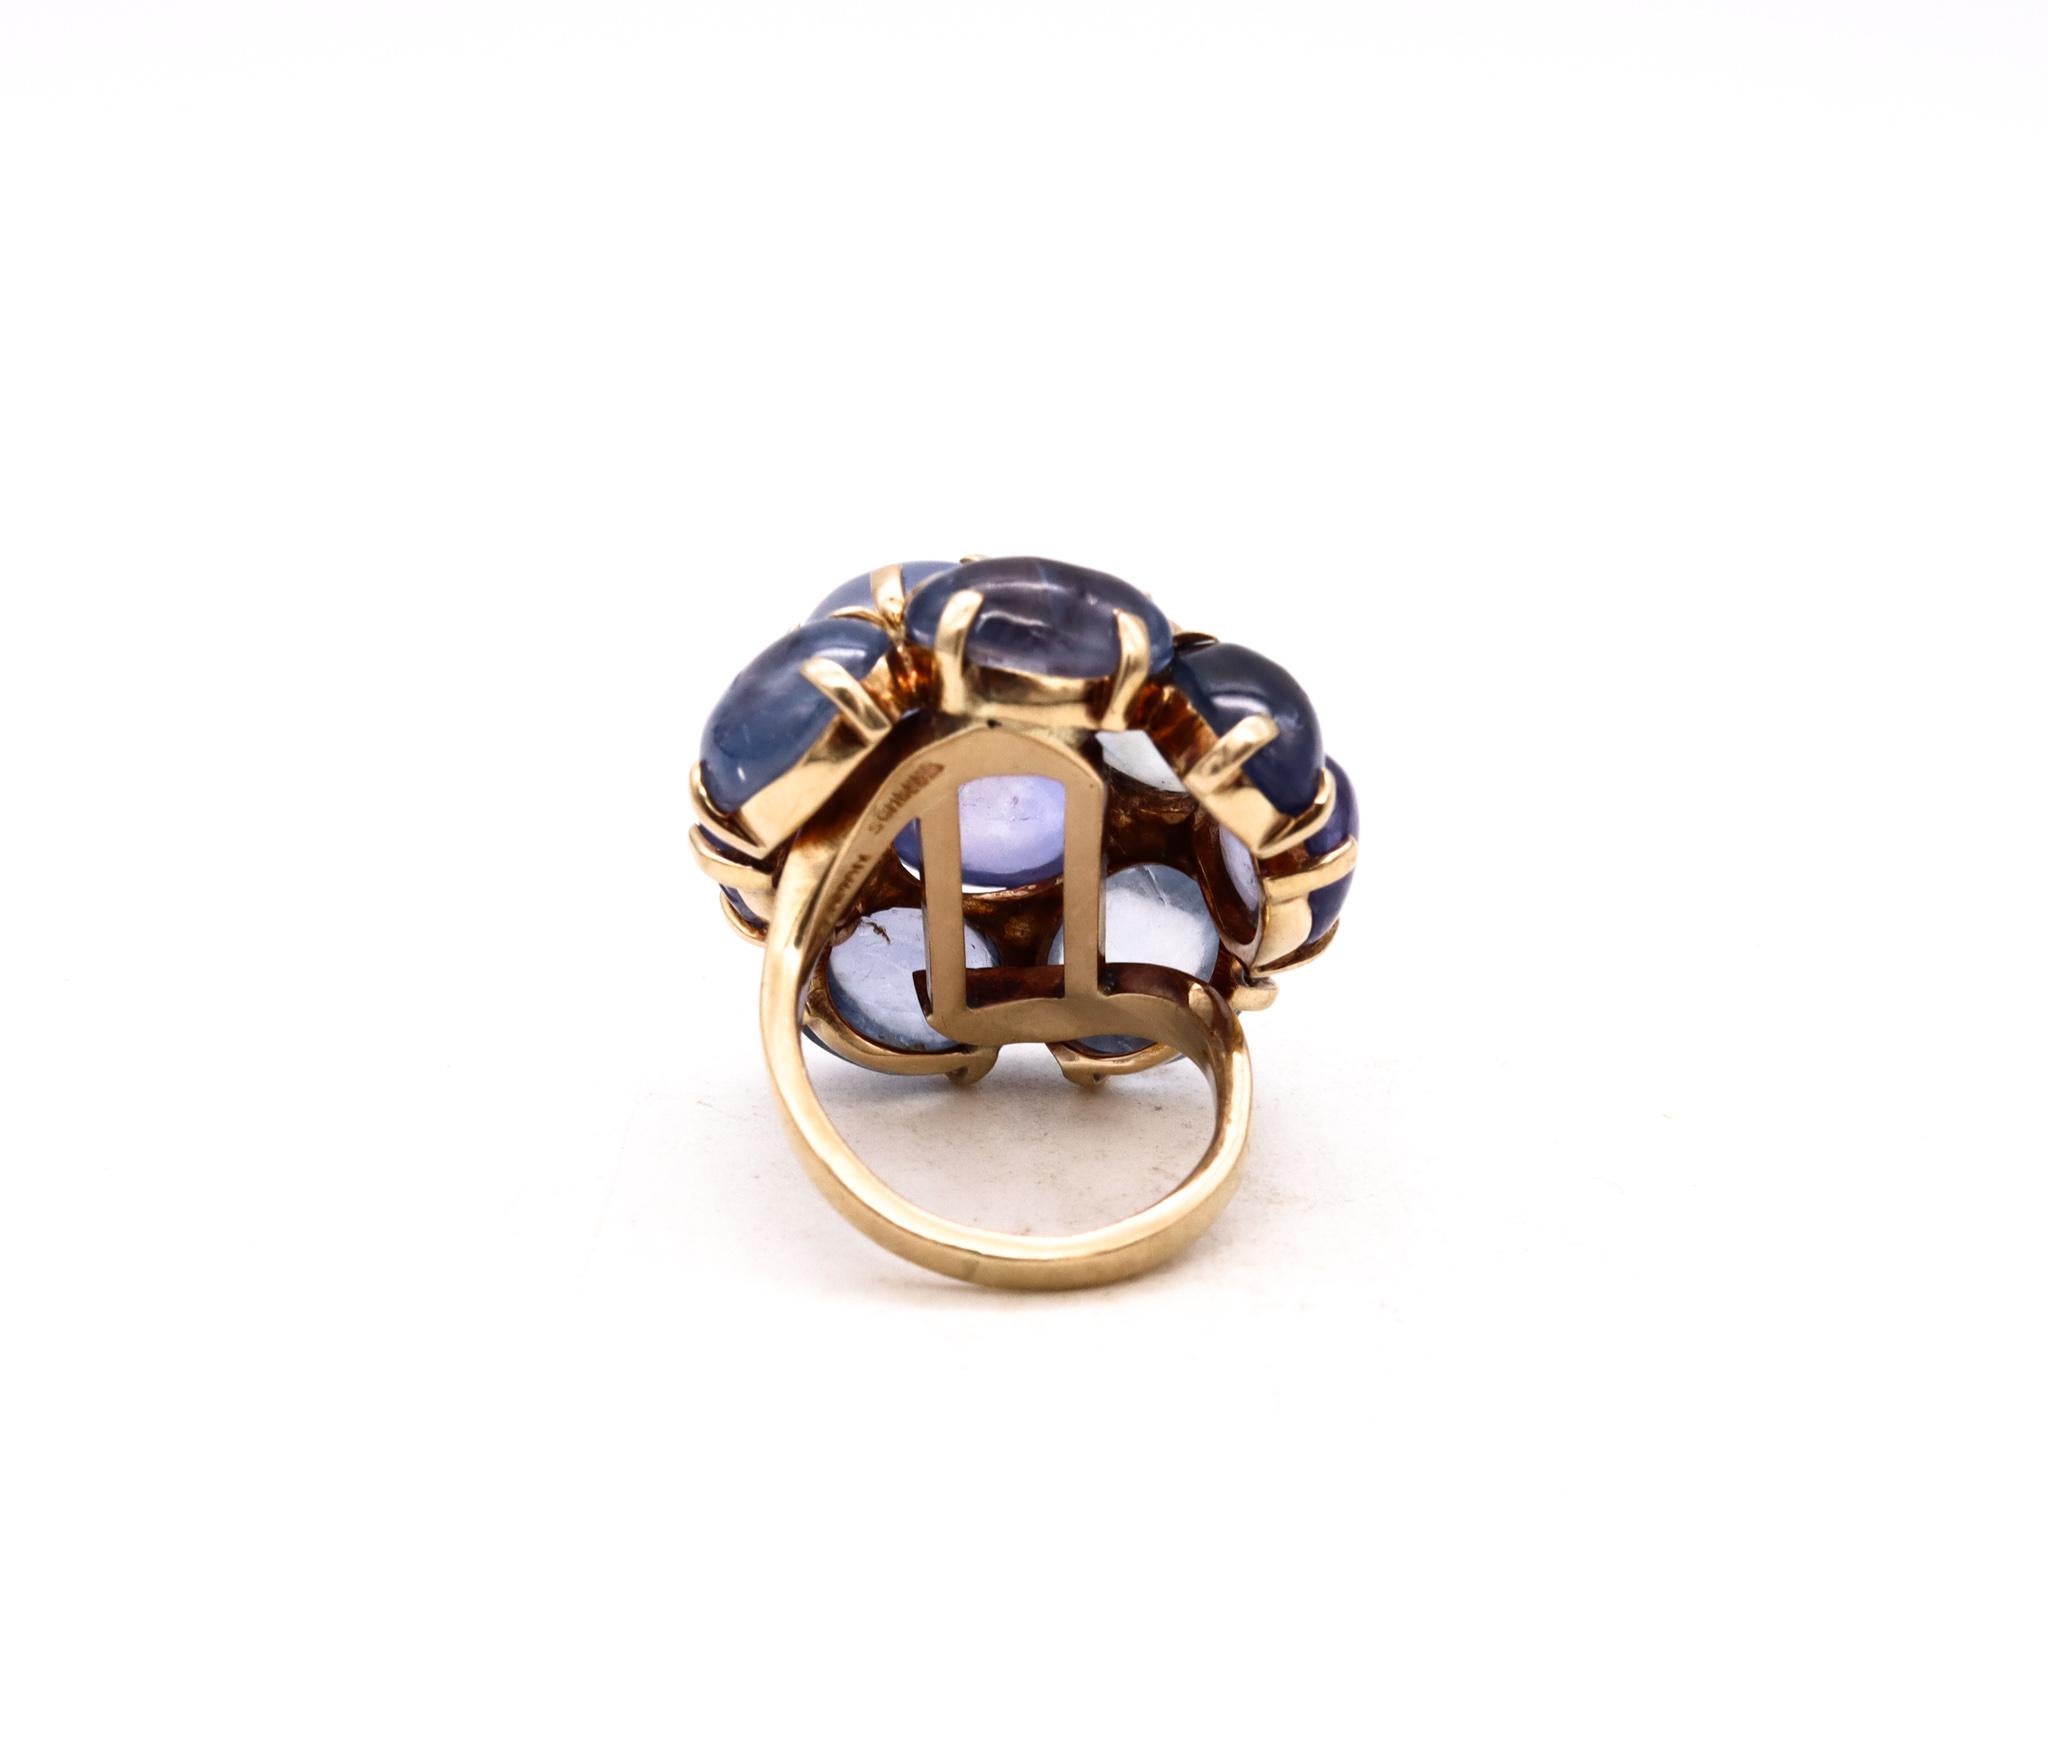 Cabochon Seaman Schepps New York Cocktail Ring in 18Kt Gold with 54.30 Cts in Sapphires For Sale